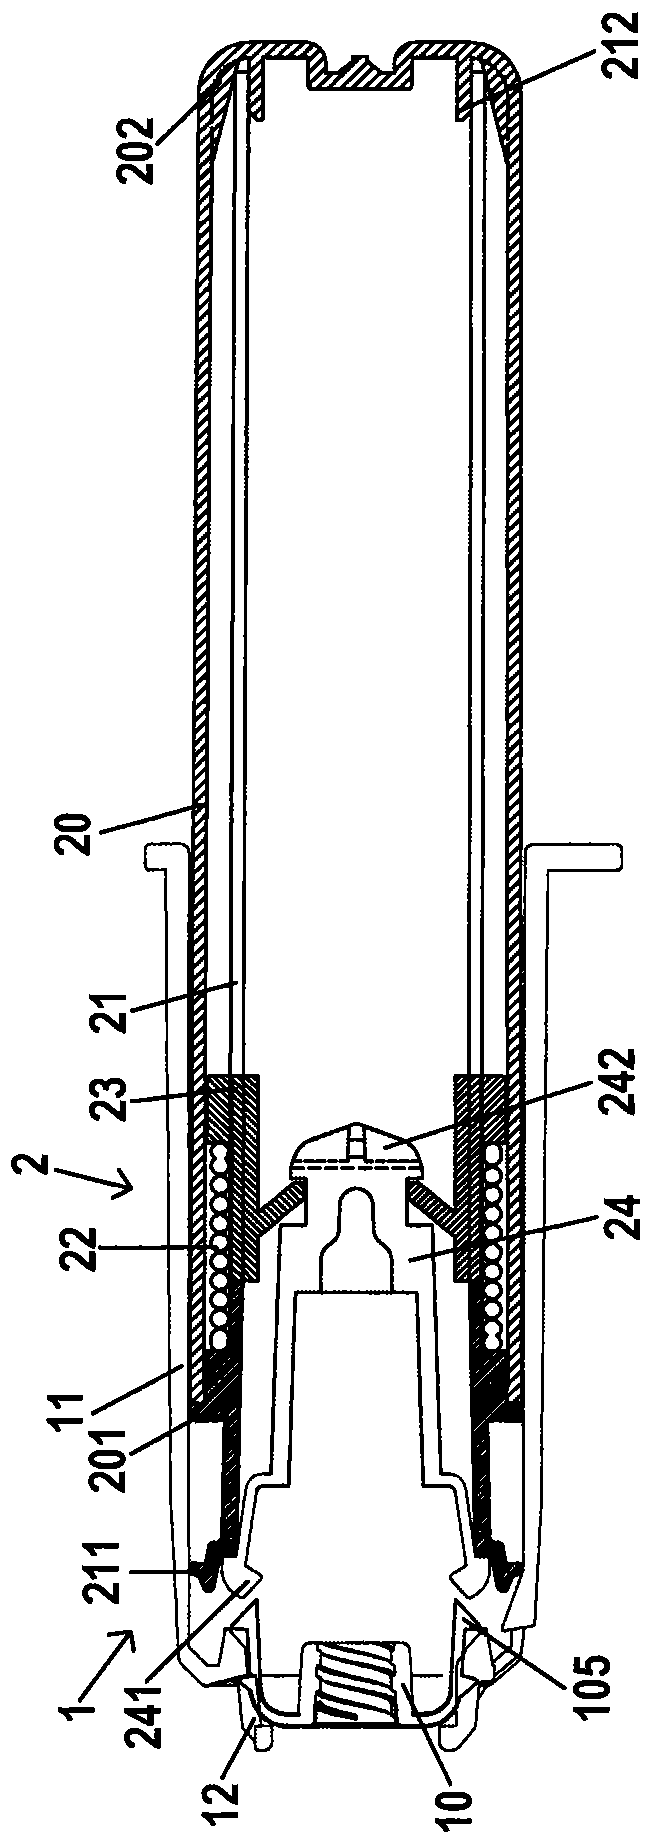 Needle Retrieval Set with Needle Holder Assembly and Retrieval Tube Assembly